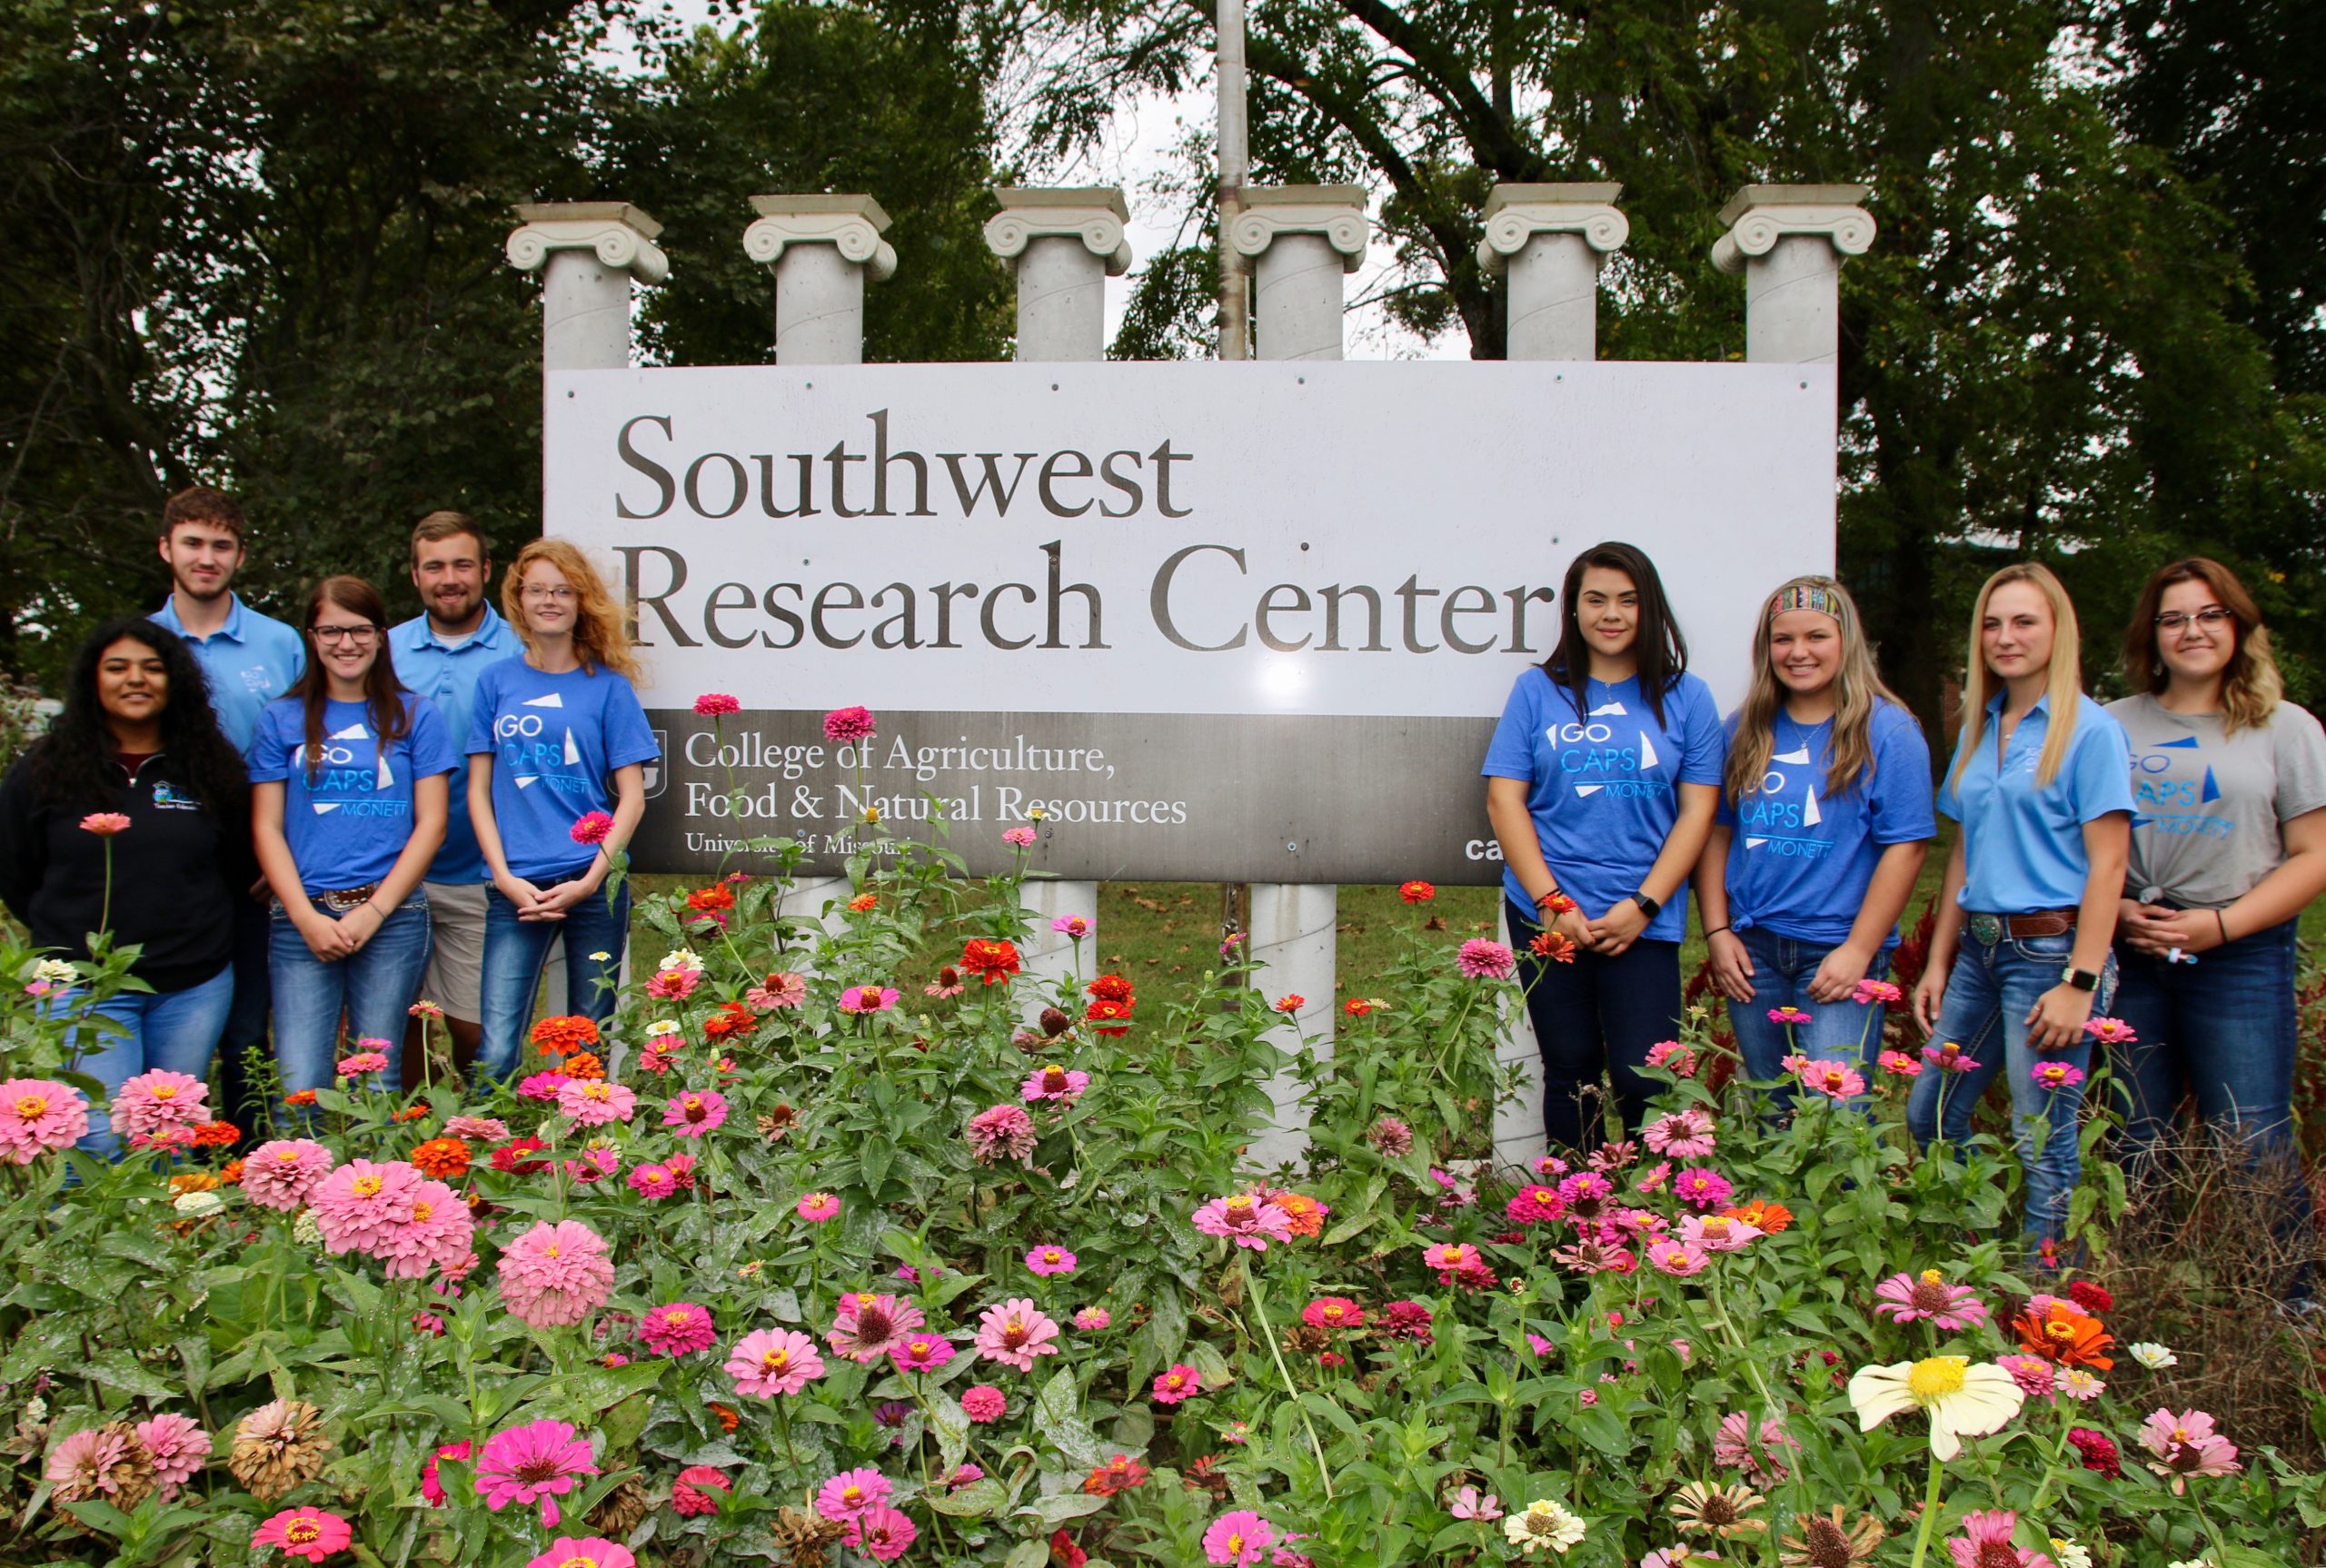 Southwest Research Center (click to read)